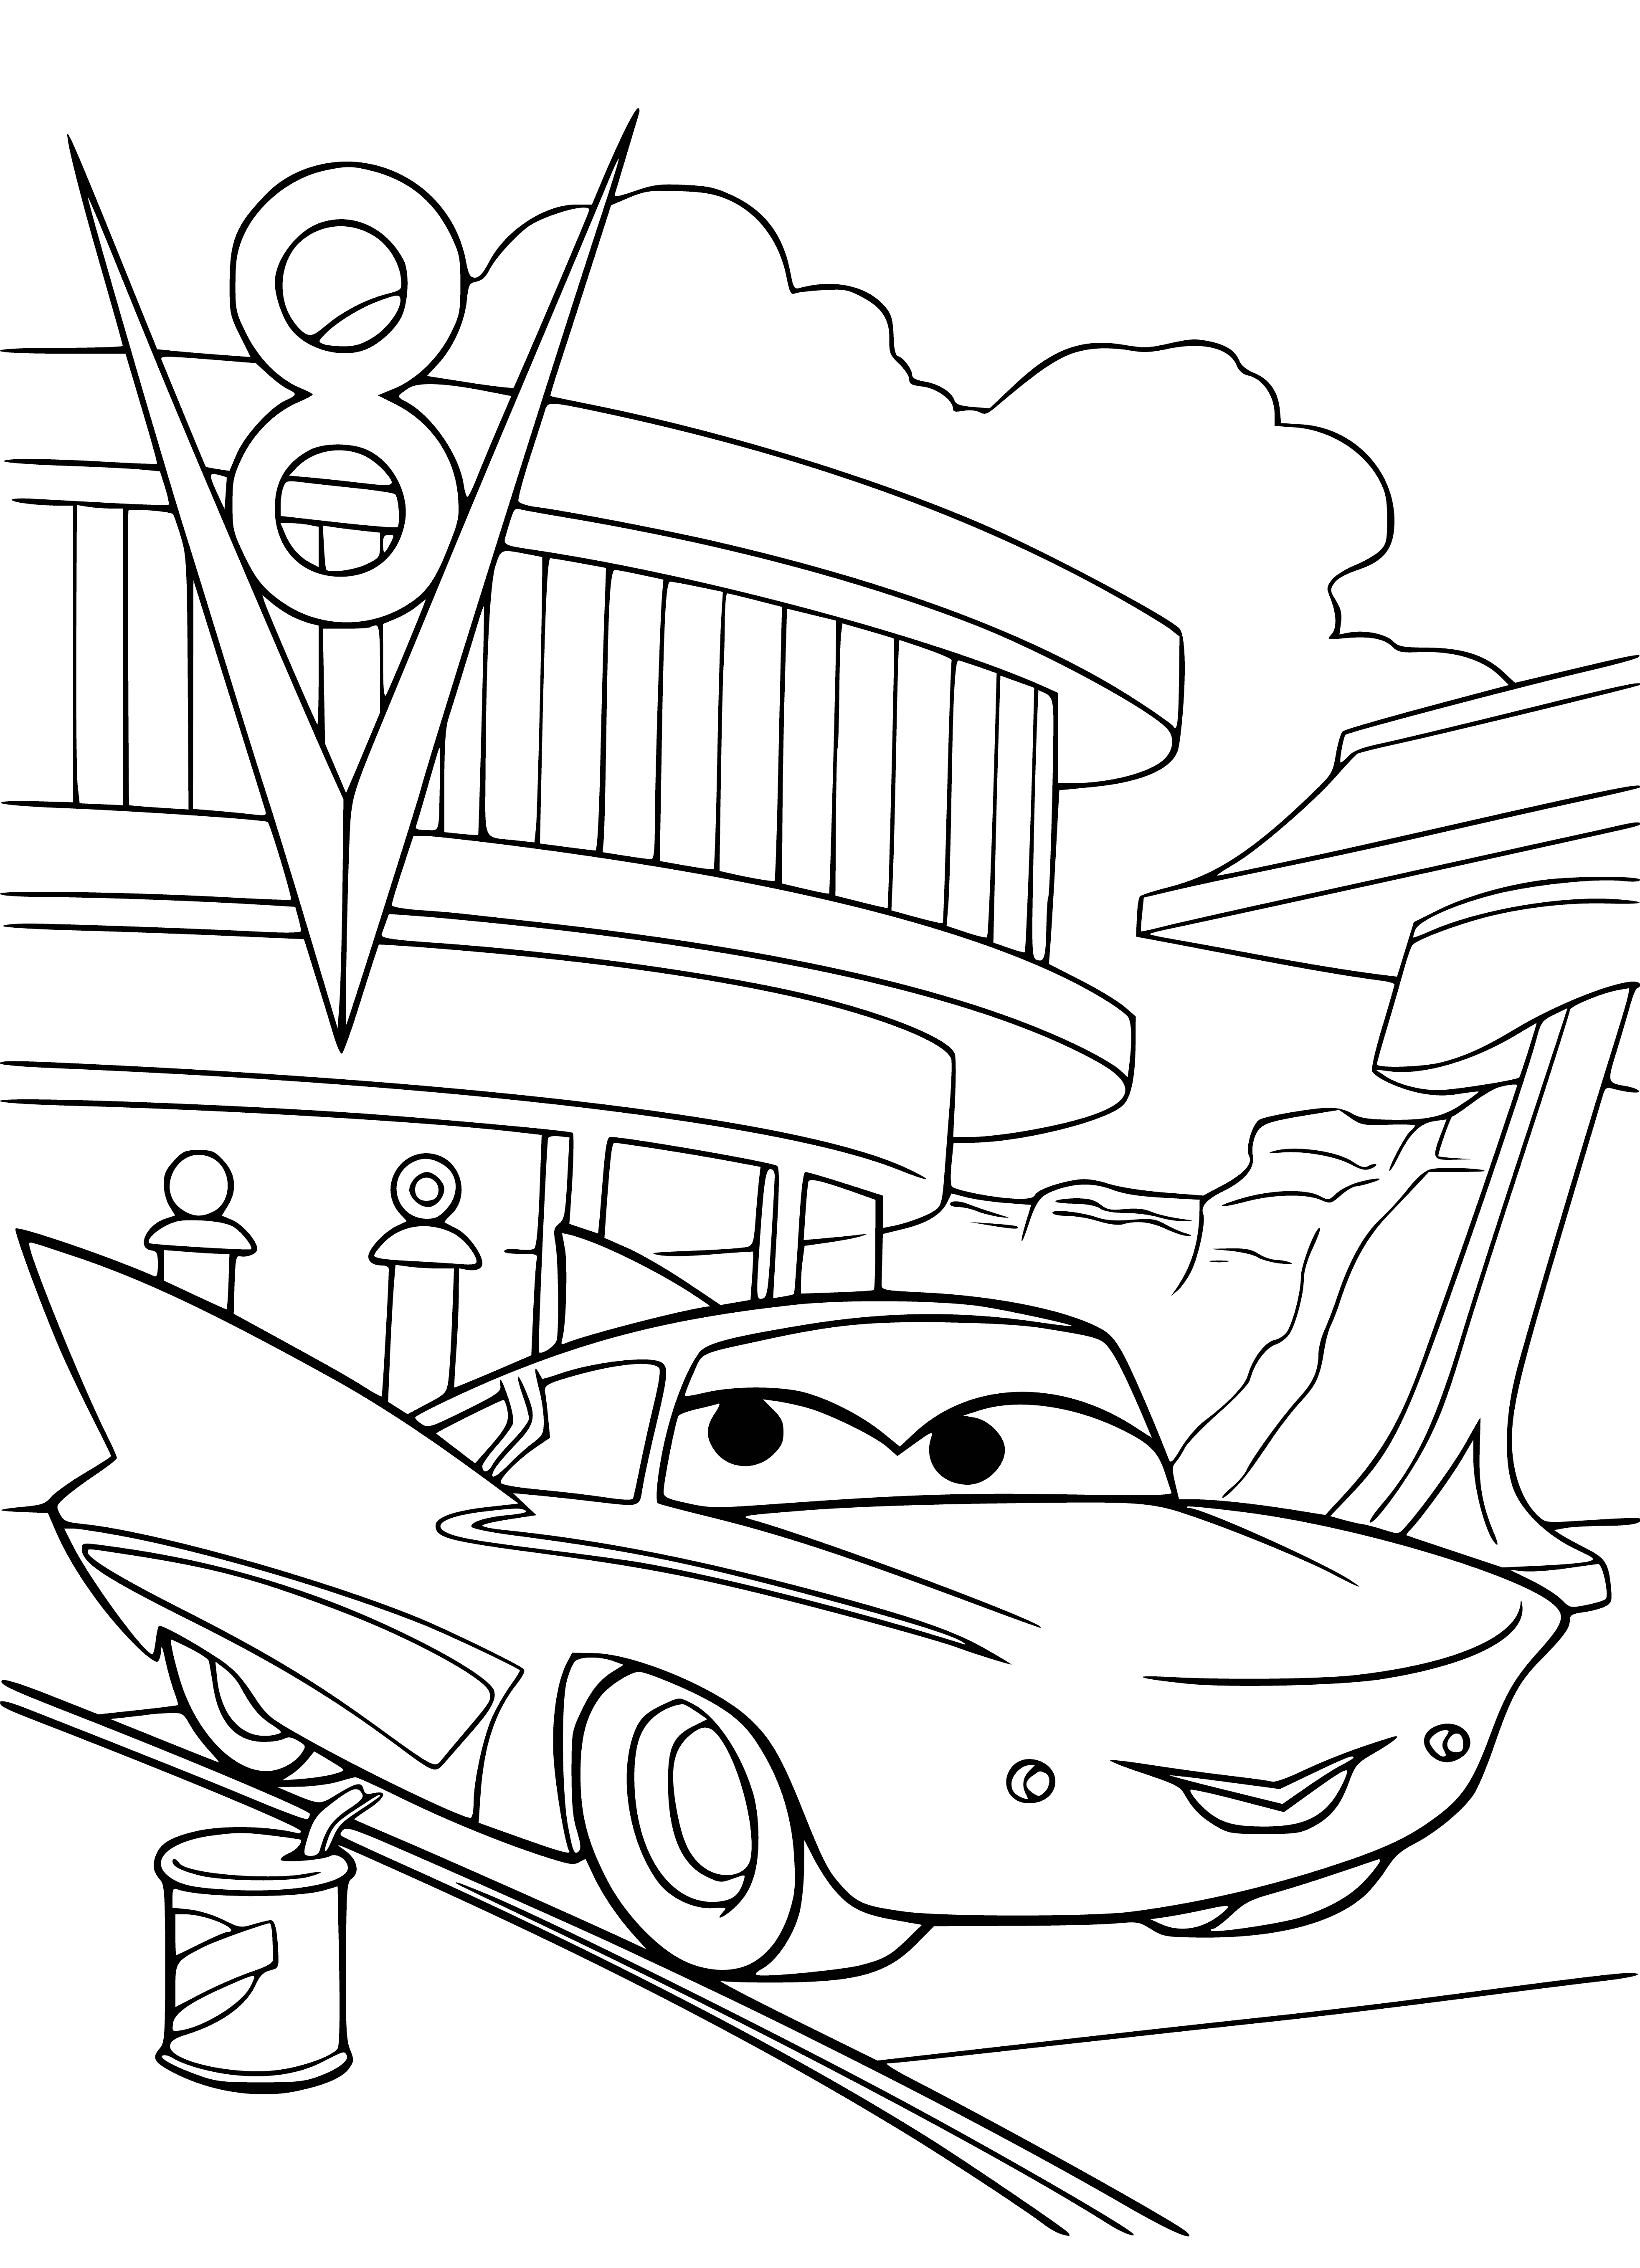 coloring page: Driver pumps gas at car, looks at dashboard. Door open, driver holds pump in one hand, other hand on door. Blue/white car.